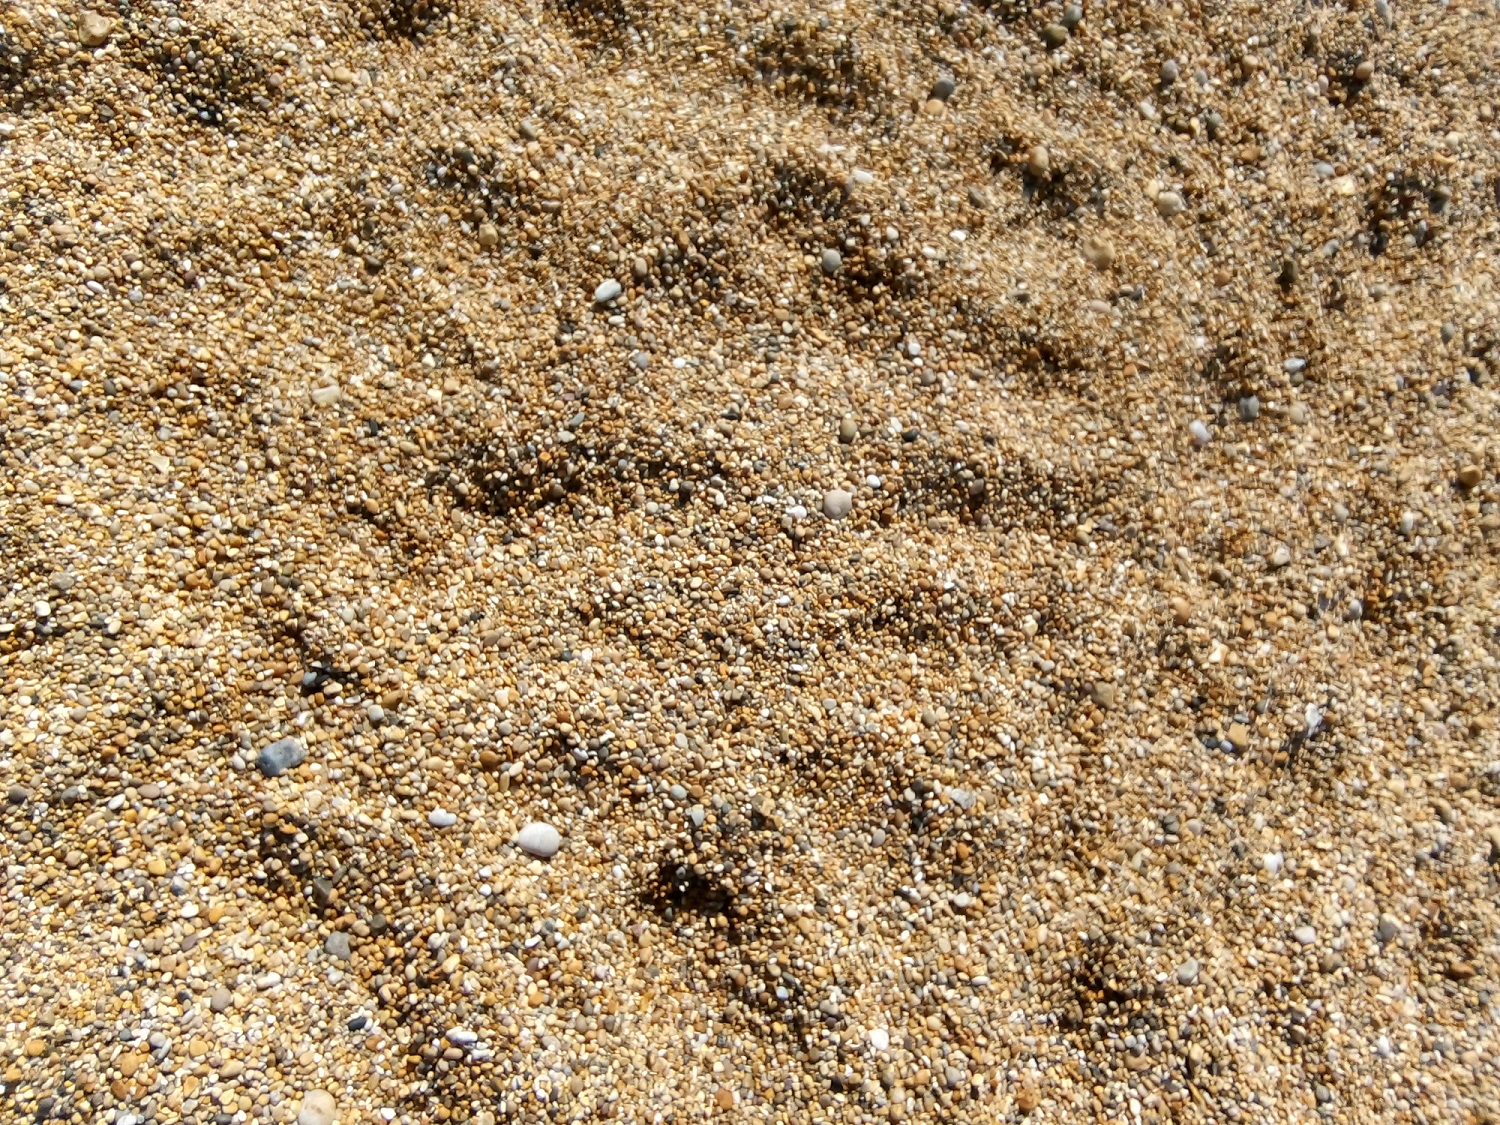 Coarse sand and small pebbles